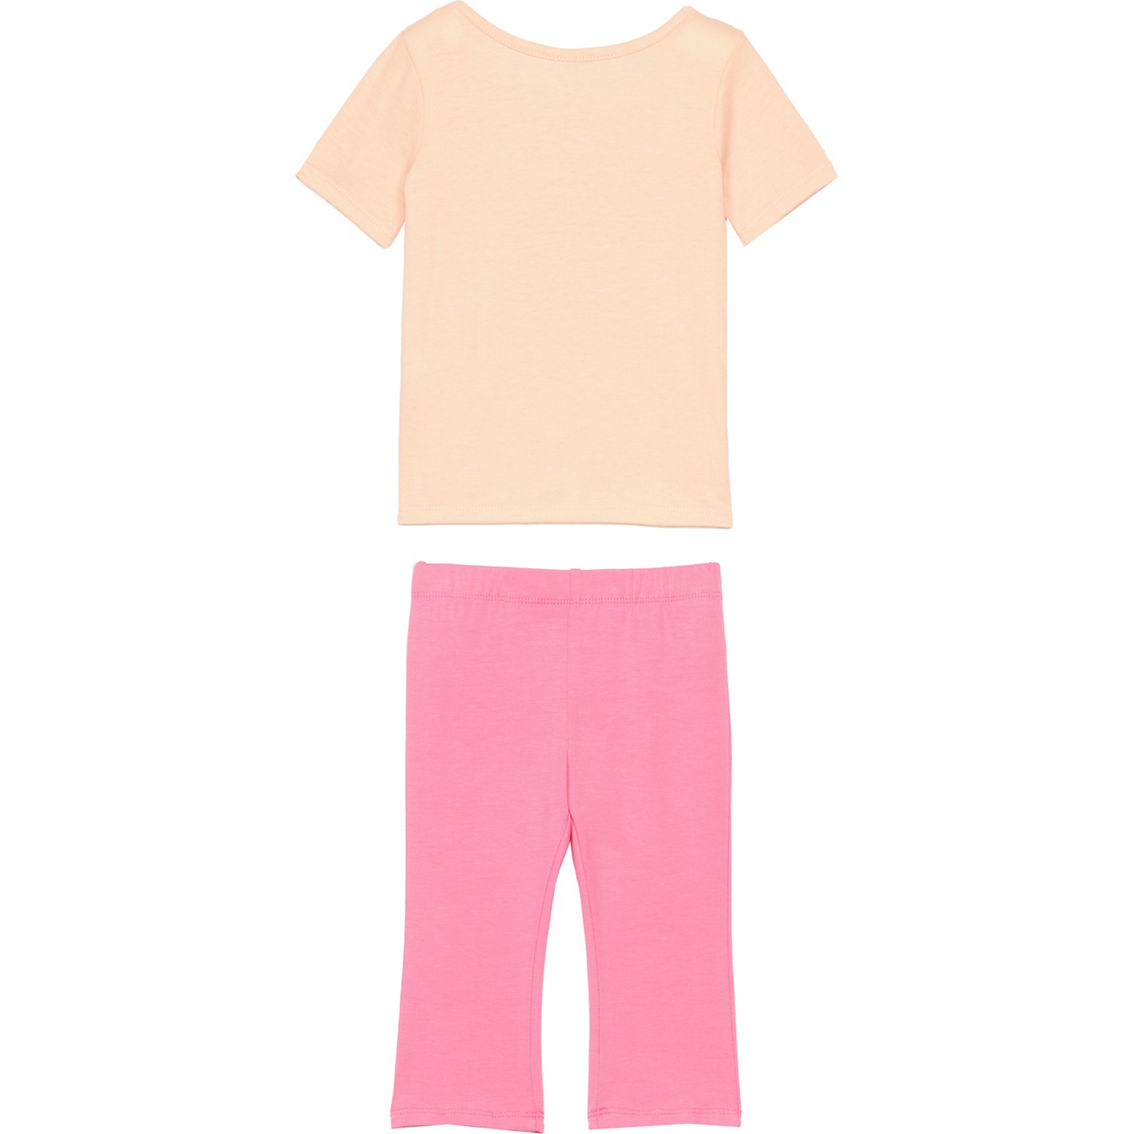 Pony Tails Little Girls Glitter Graphic Tee and Flare Leggings 2 pc. Set - Image 2 of 2